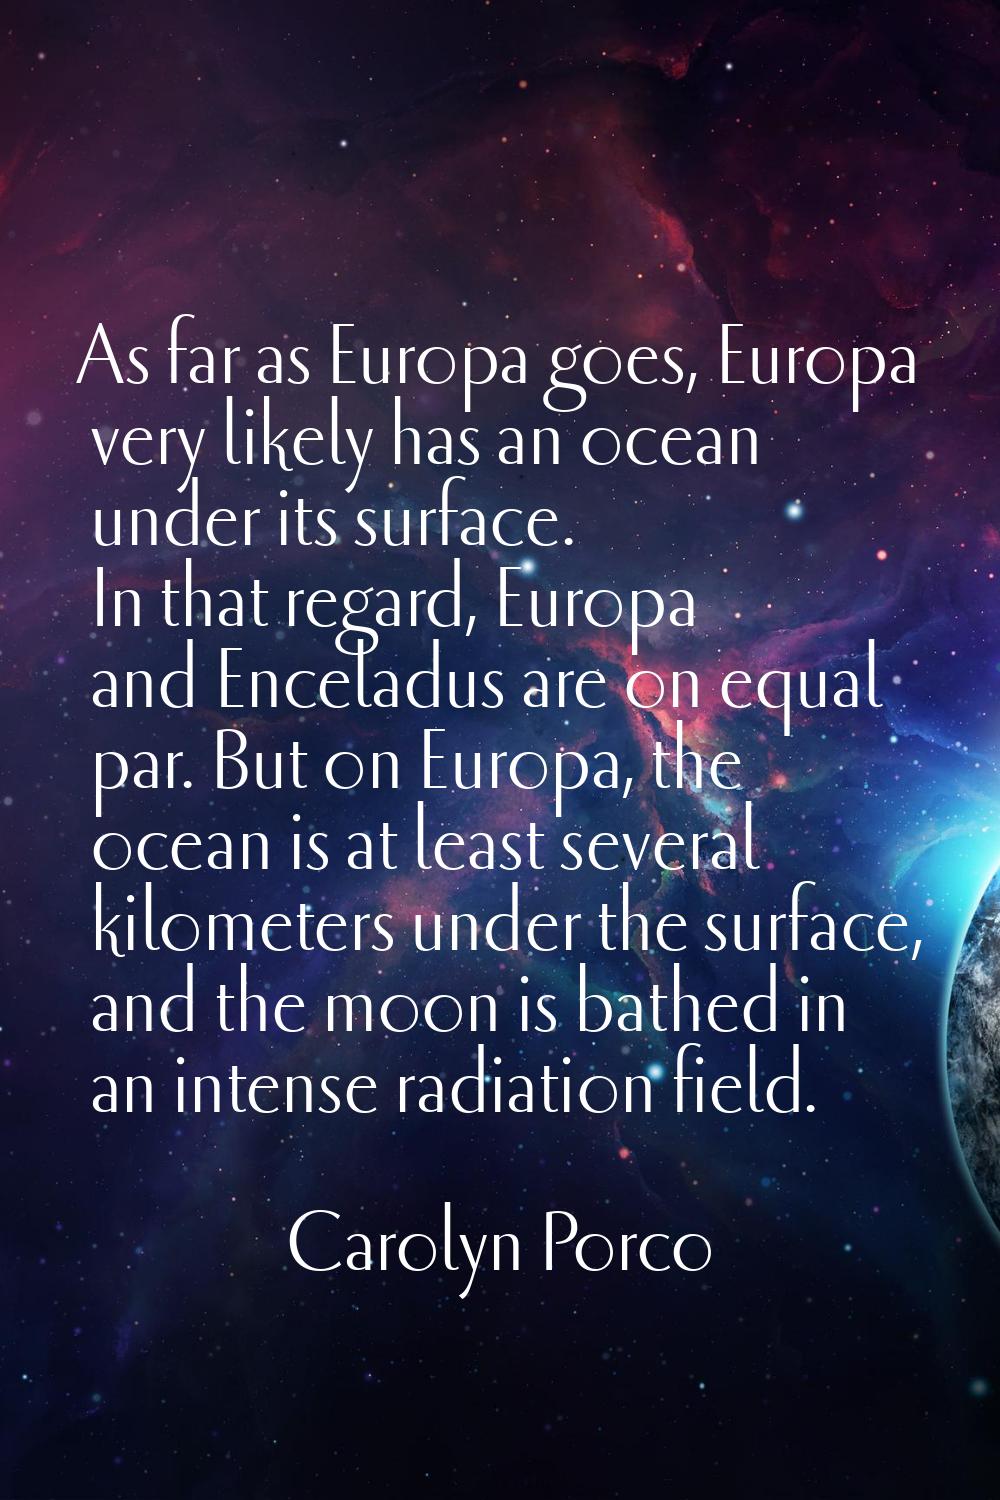 As far as Europa goes, Europa very likely has an ocean under its surface. In that regard, Europa an